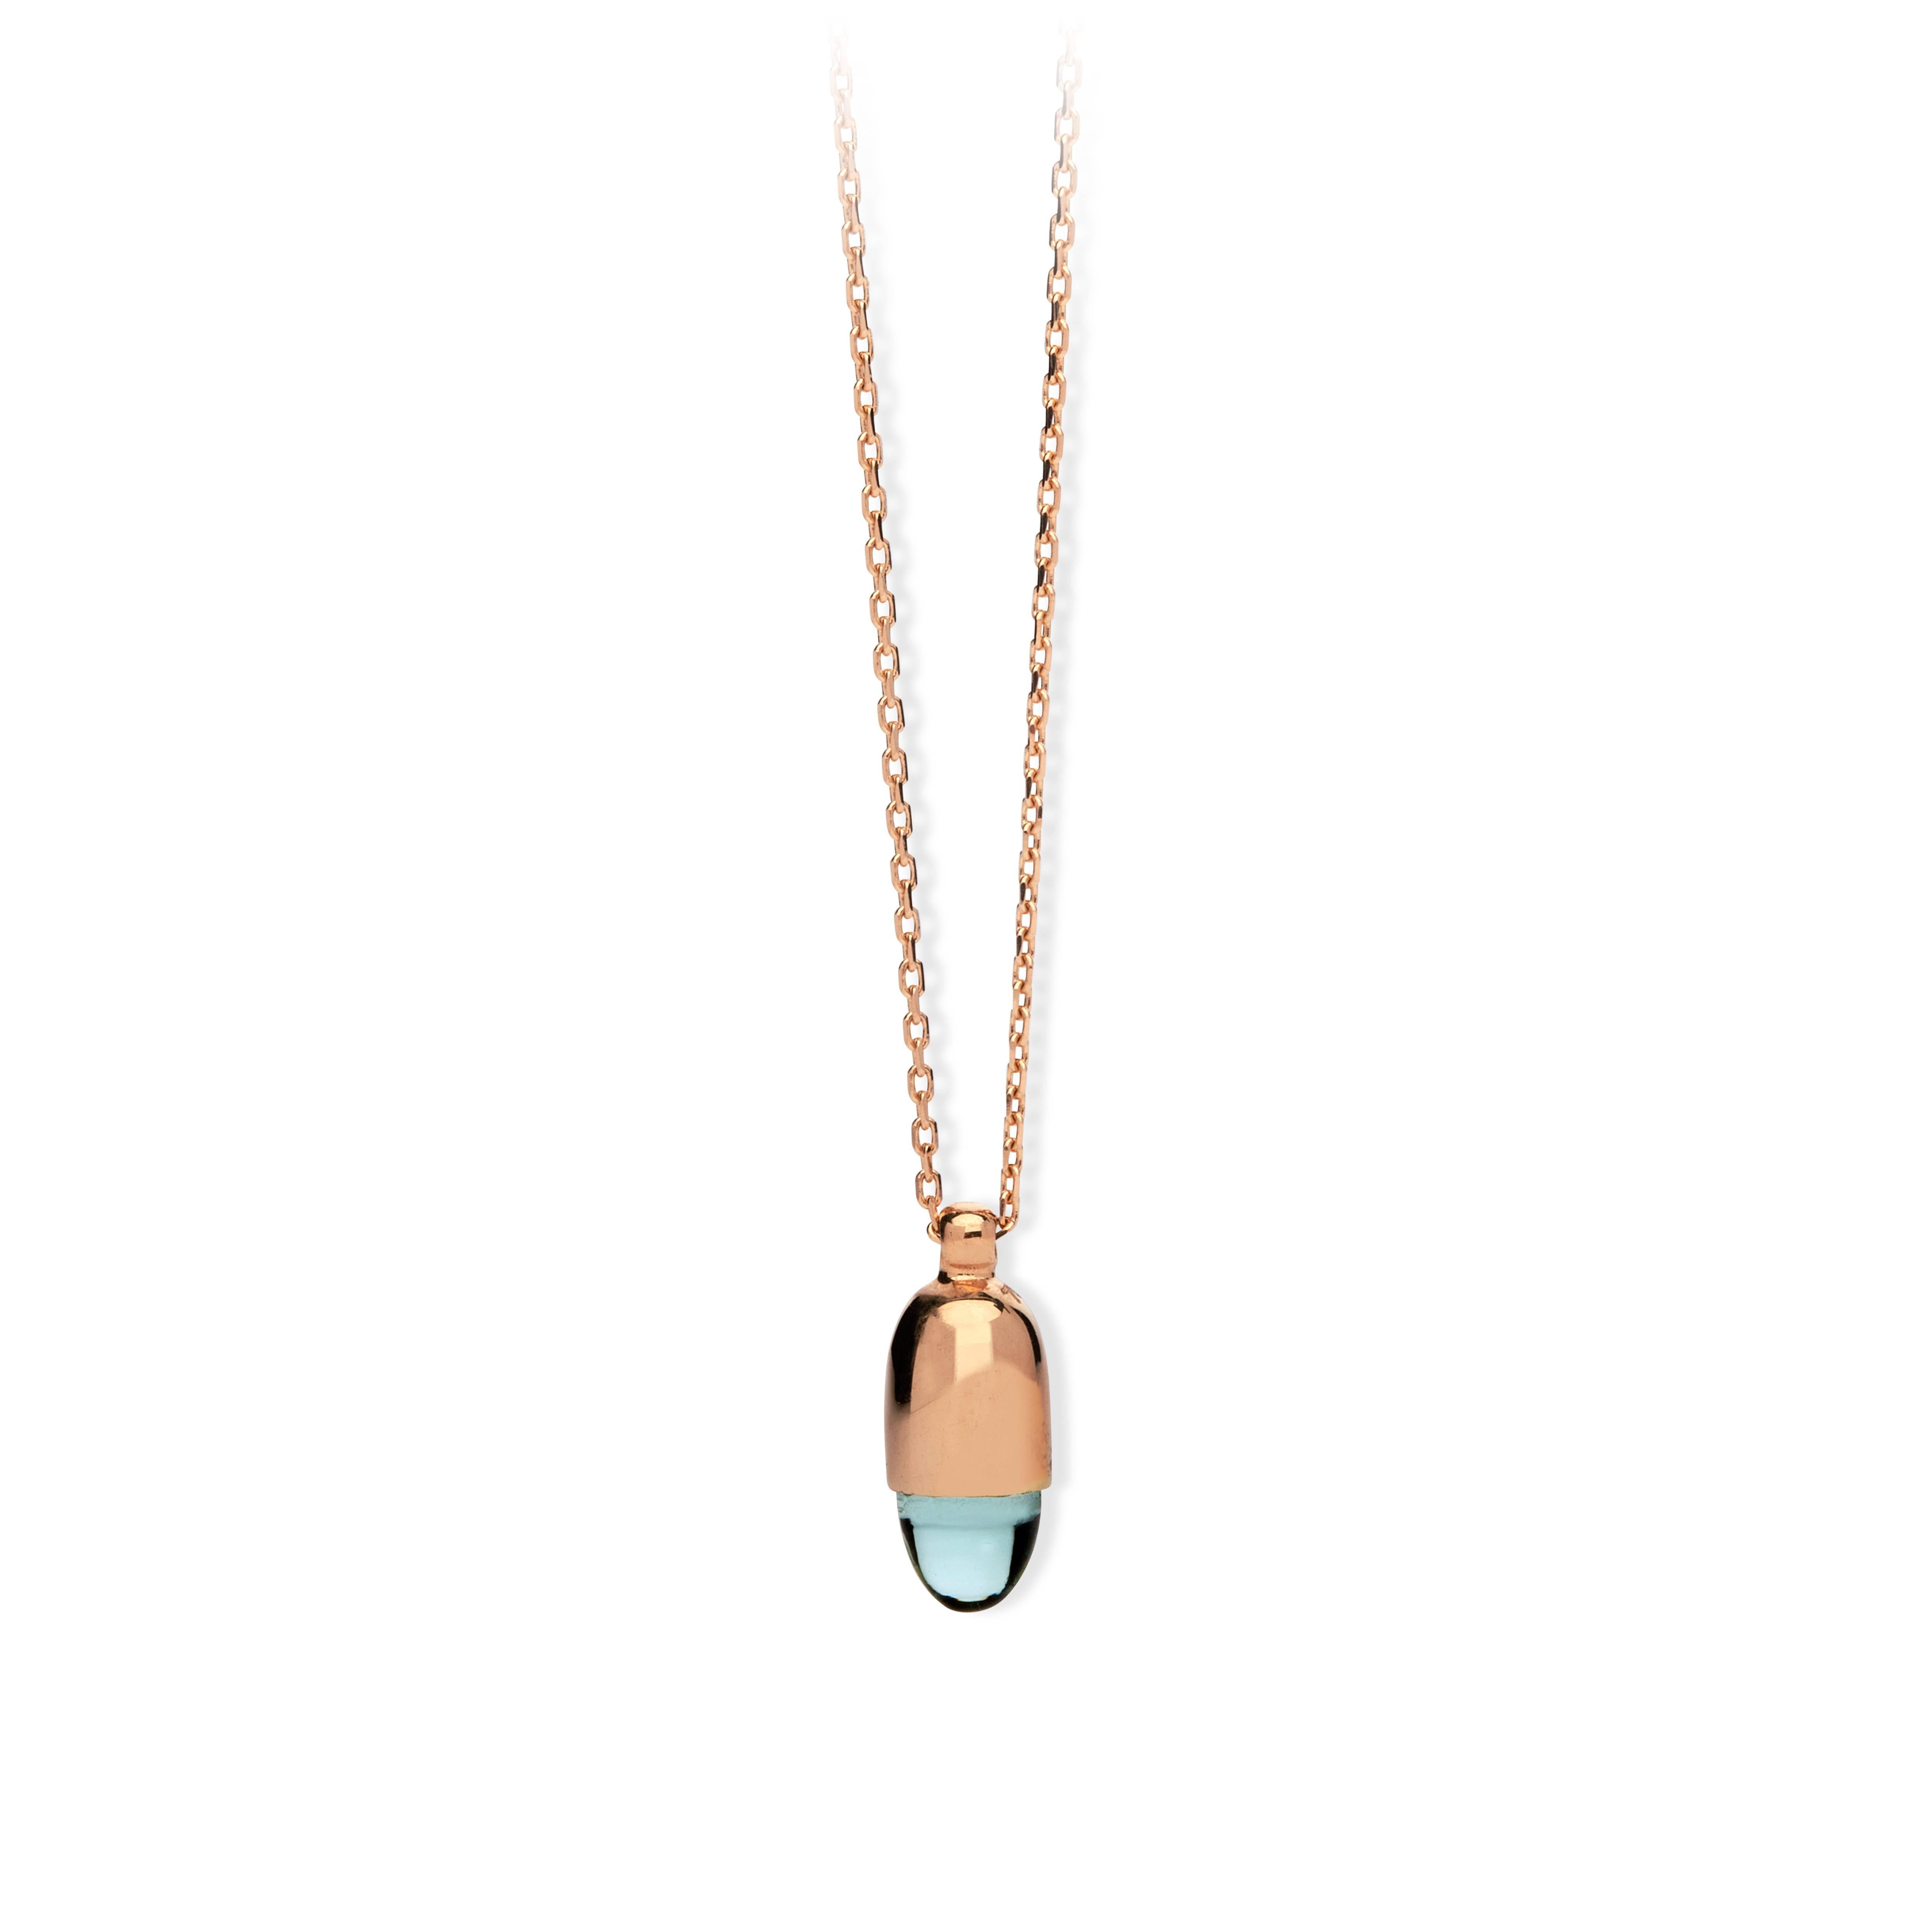 MAVIADA's Skopelos 18k solid gold pendant, 5x7mm smooth cut bullet shaped stone.
Our cheerful 18k solid gold pendants come in yellow gold or rose gold and are offered in a wide range of coloured gemstones.
The bullet shaped smooth cut stones measure